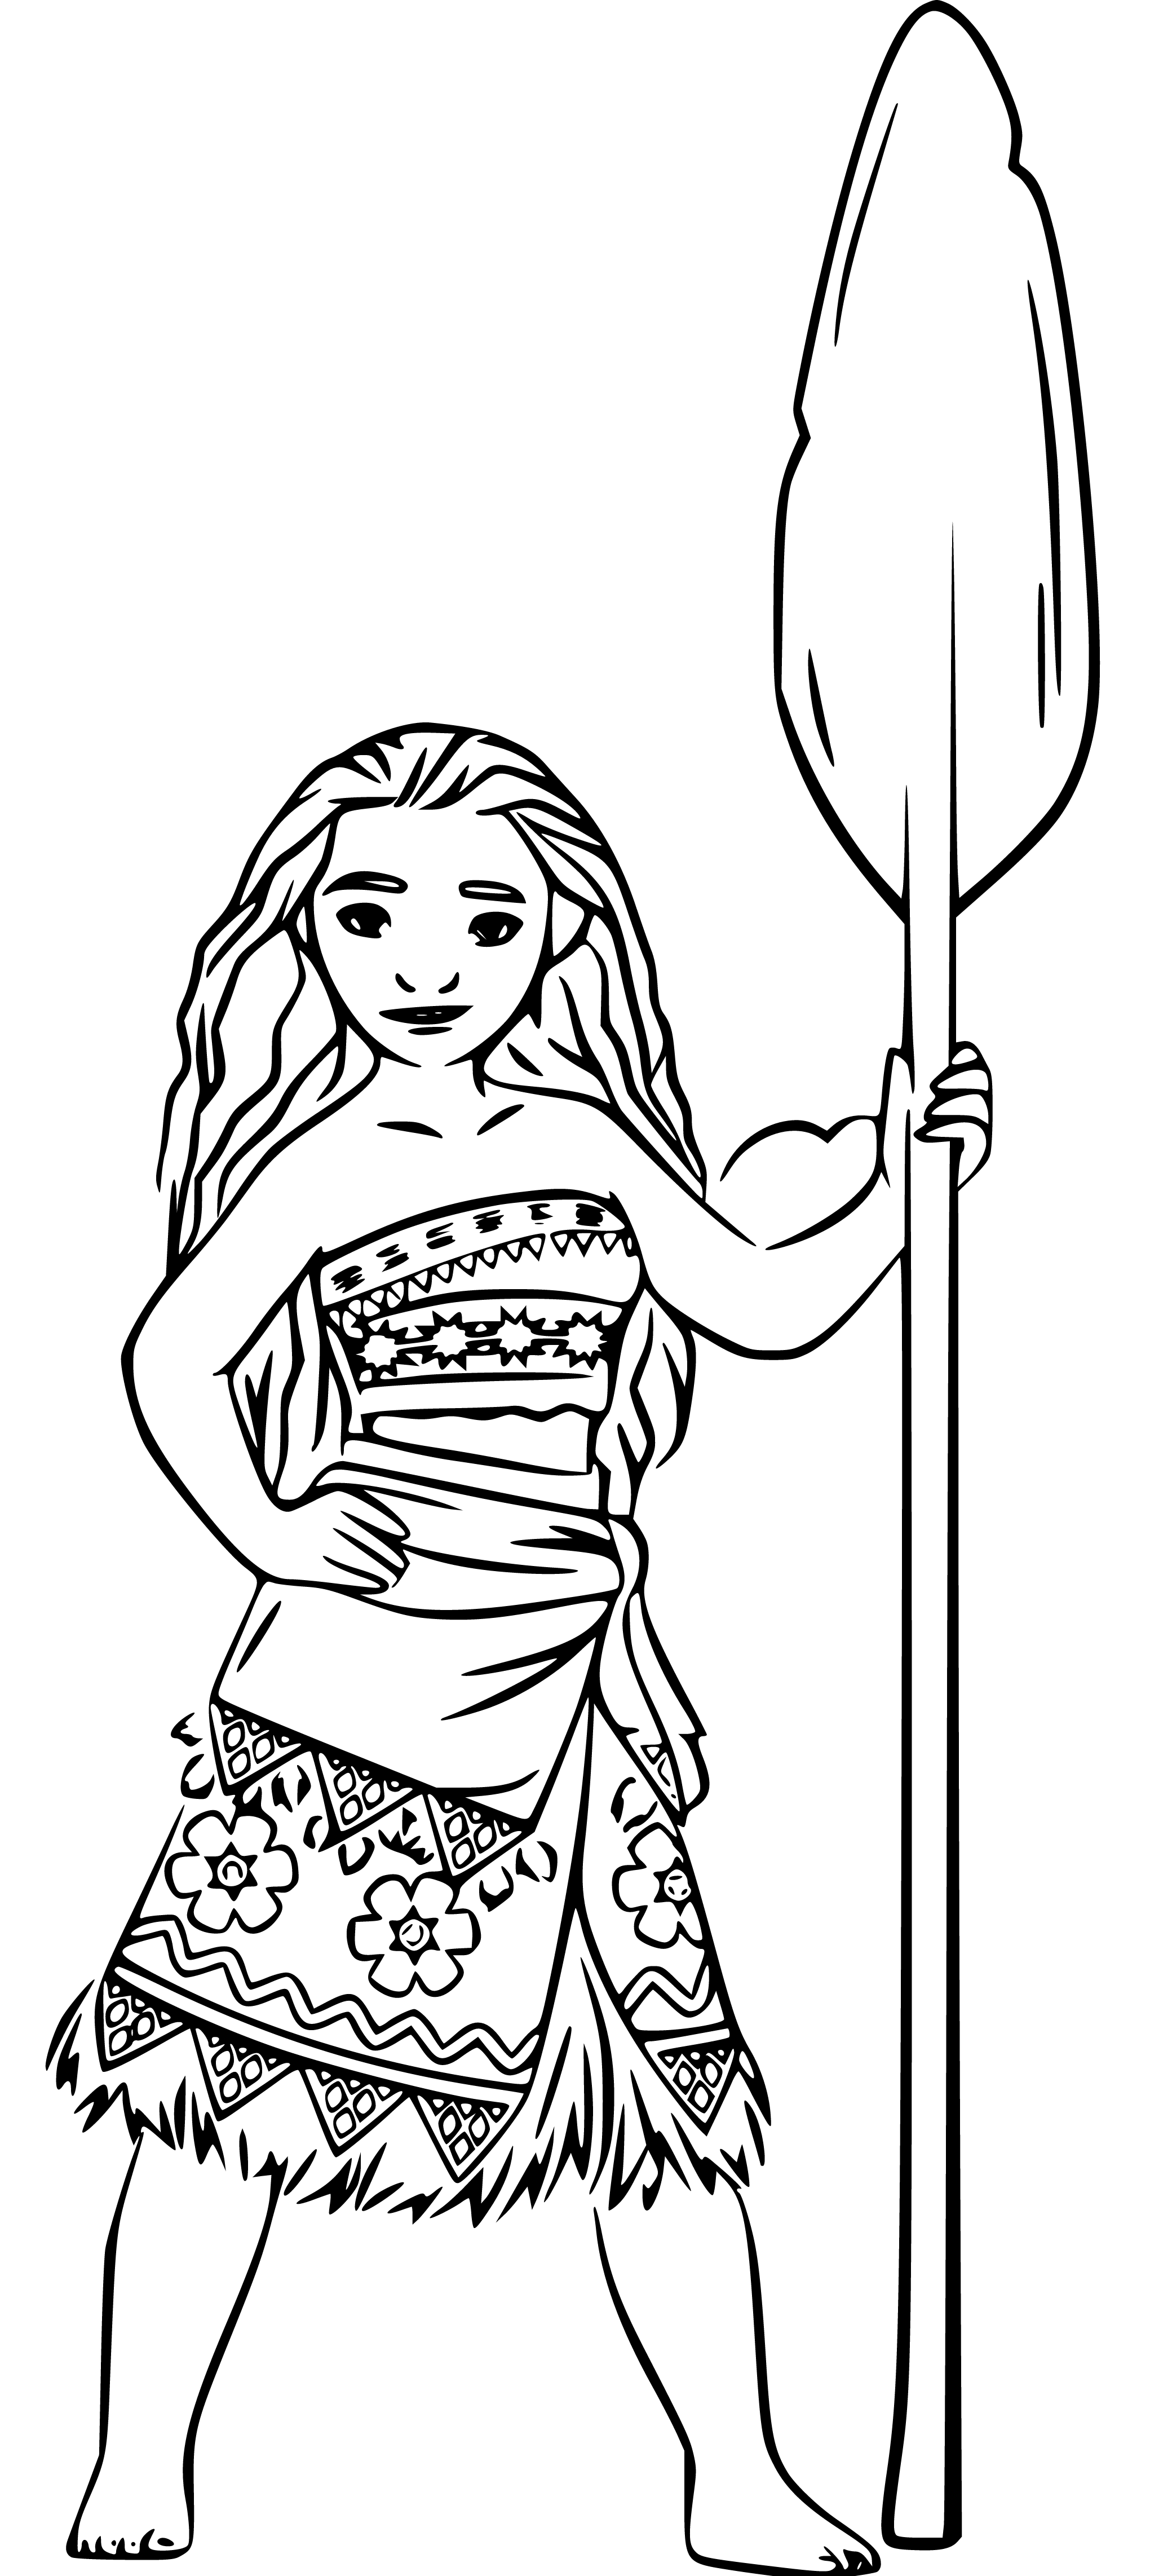 Printable Moana and the oar Coloring Page for kids.